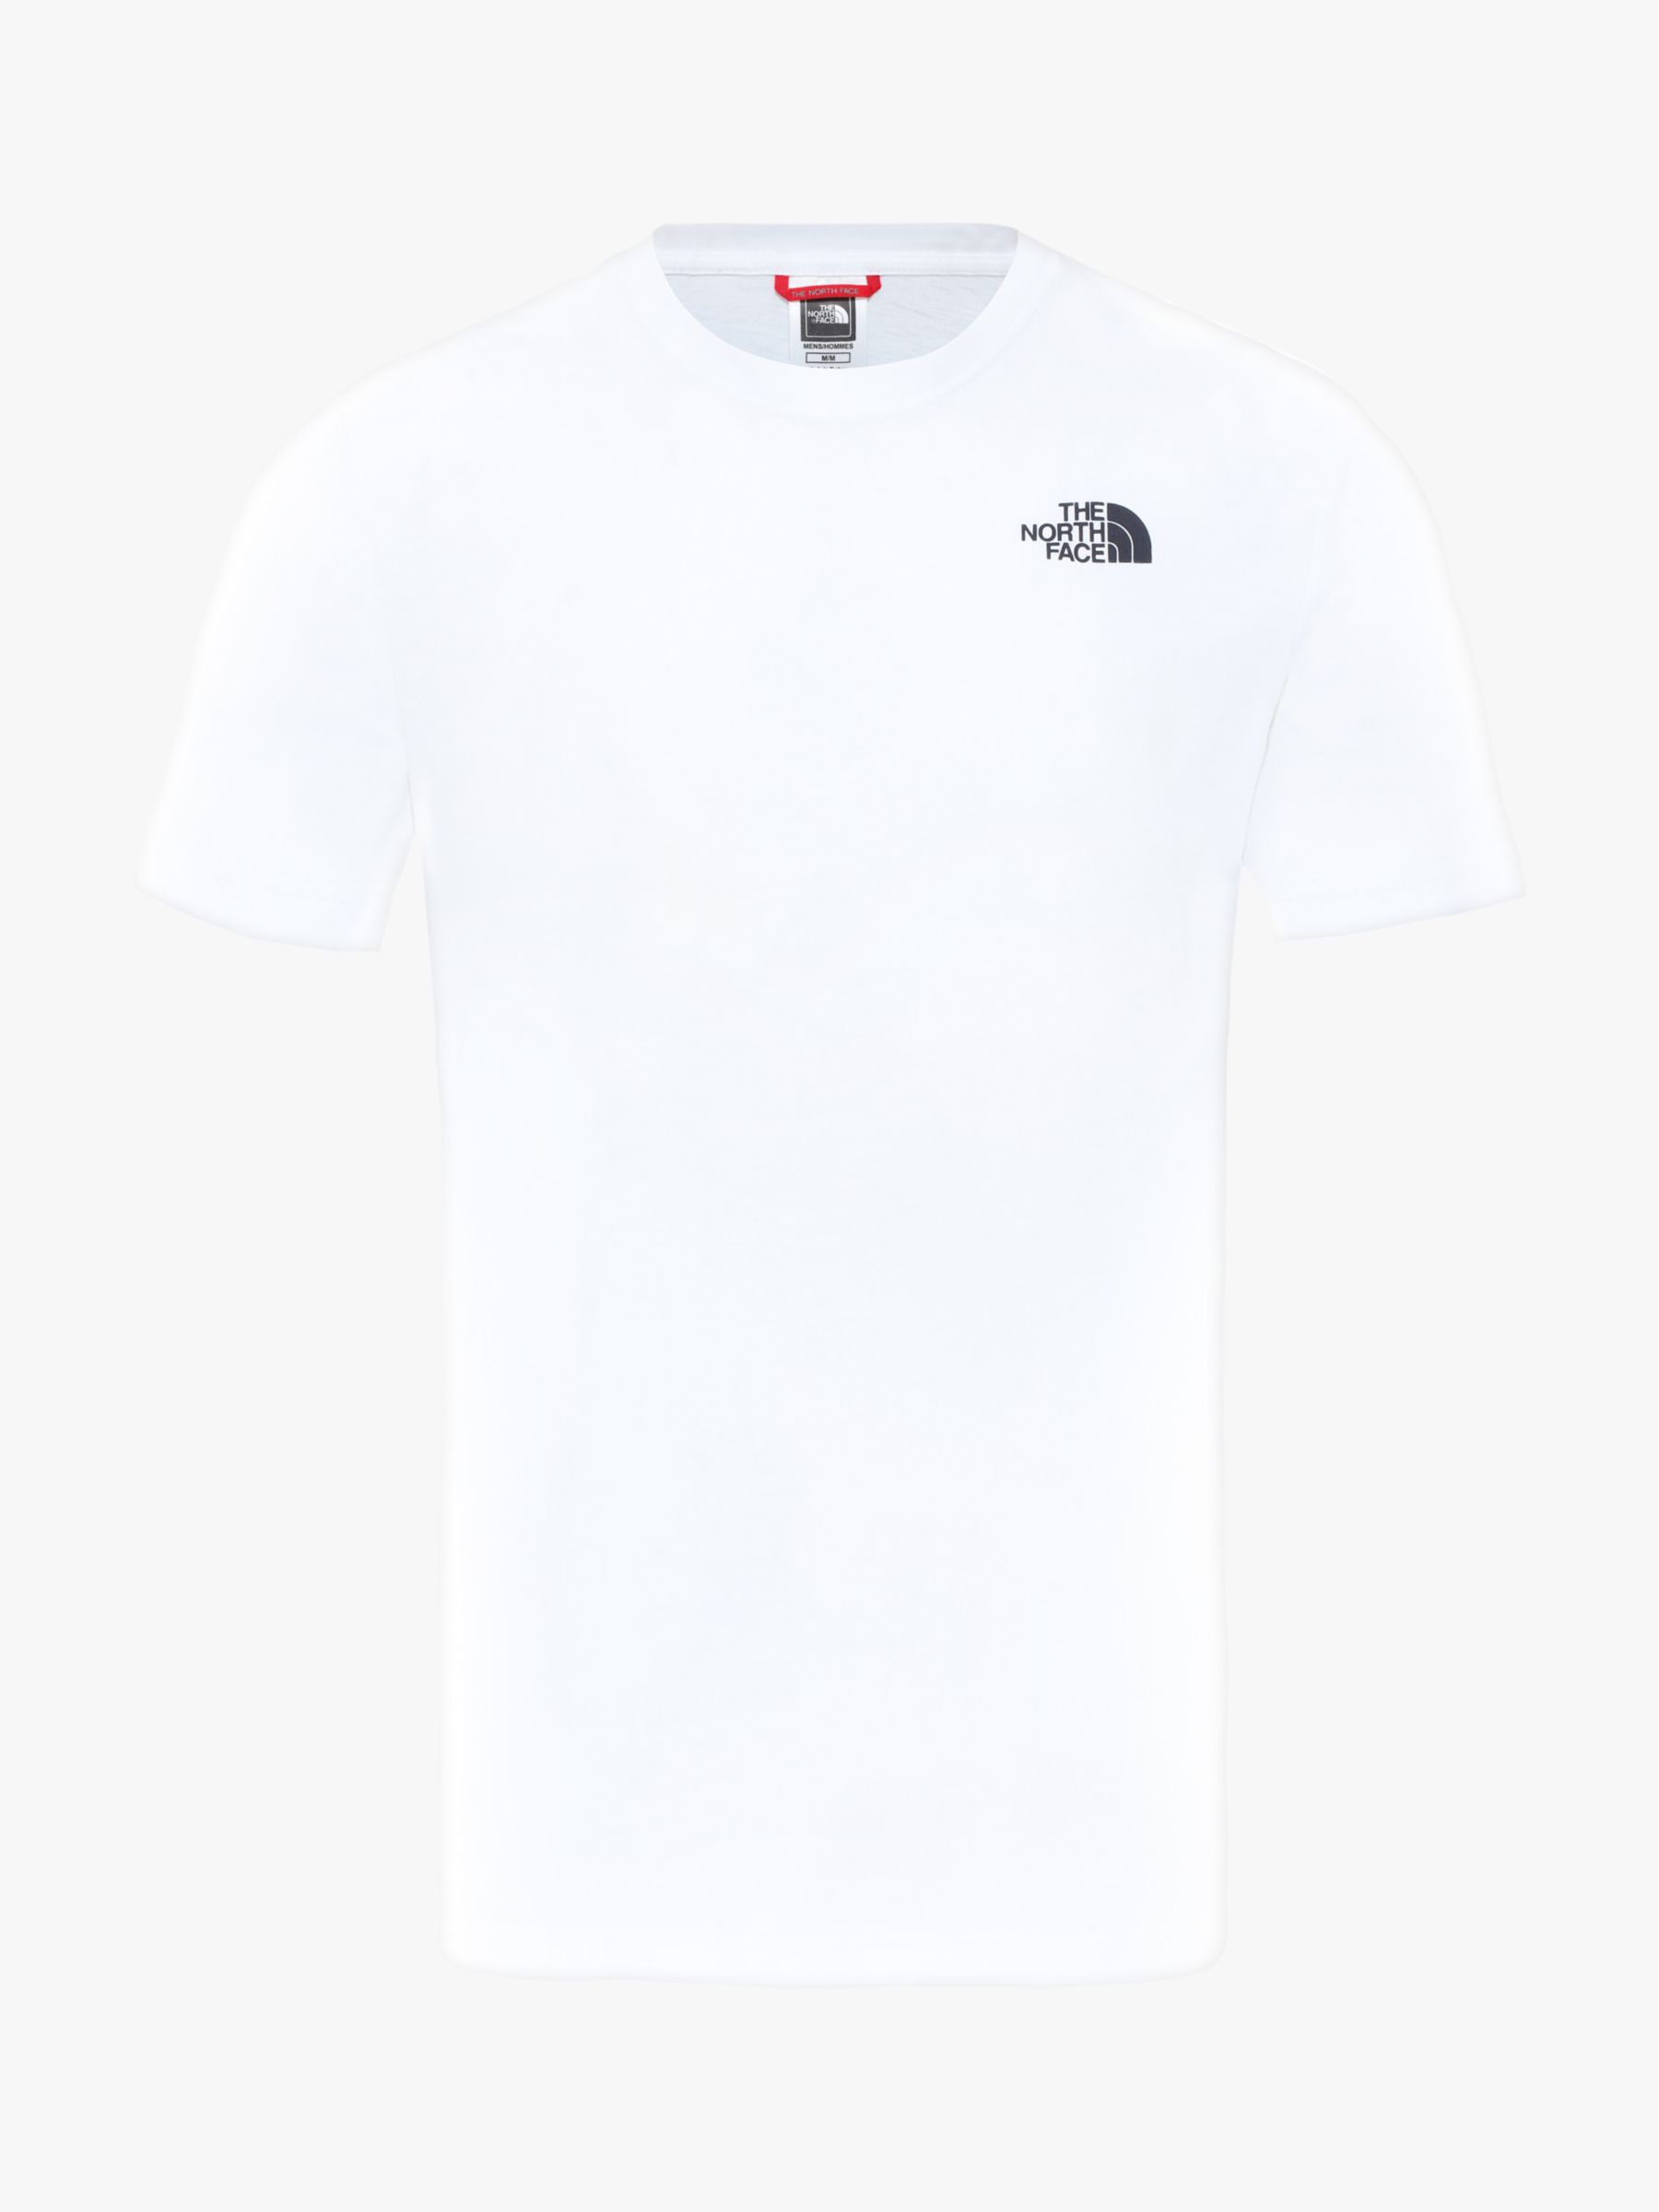 north face technical t shirt